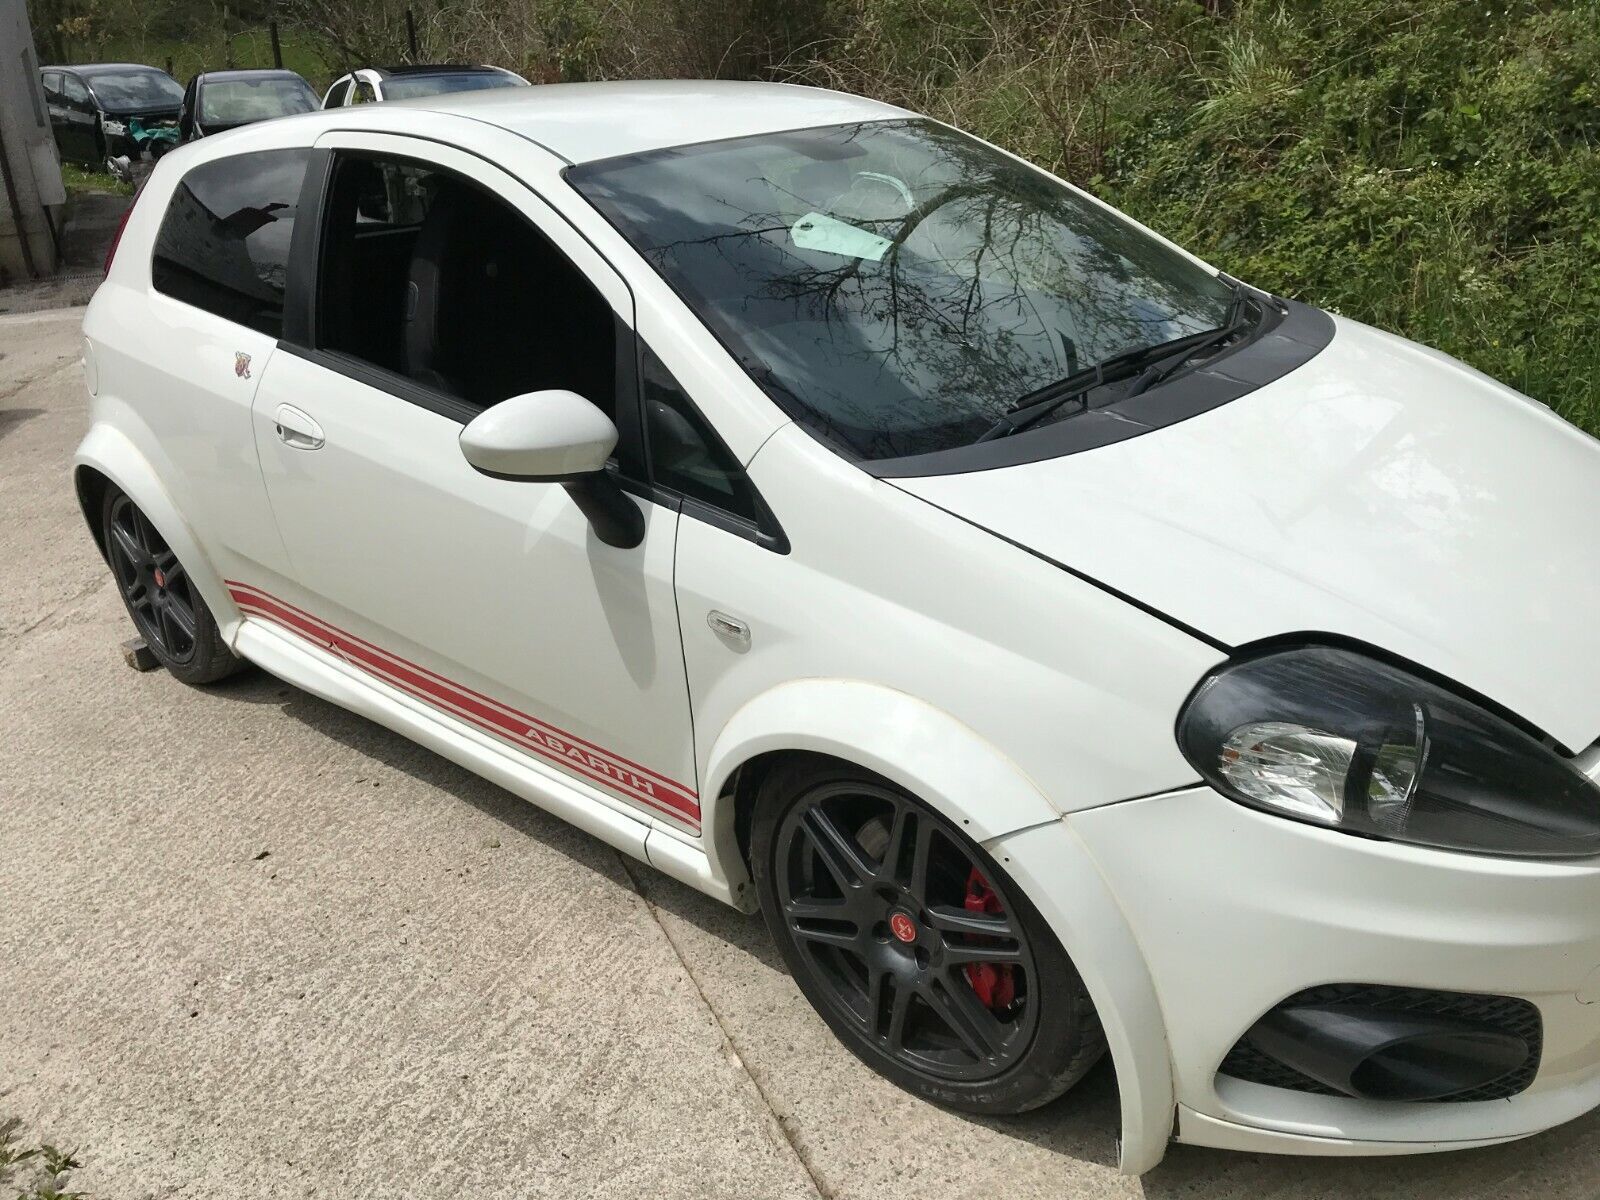 FIAT GRANDE PUNTO ABARTH QUALITY CONDITION ONLY 47K ON CLOCK ALL PARTS AVAILABLE